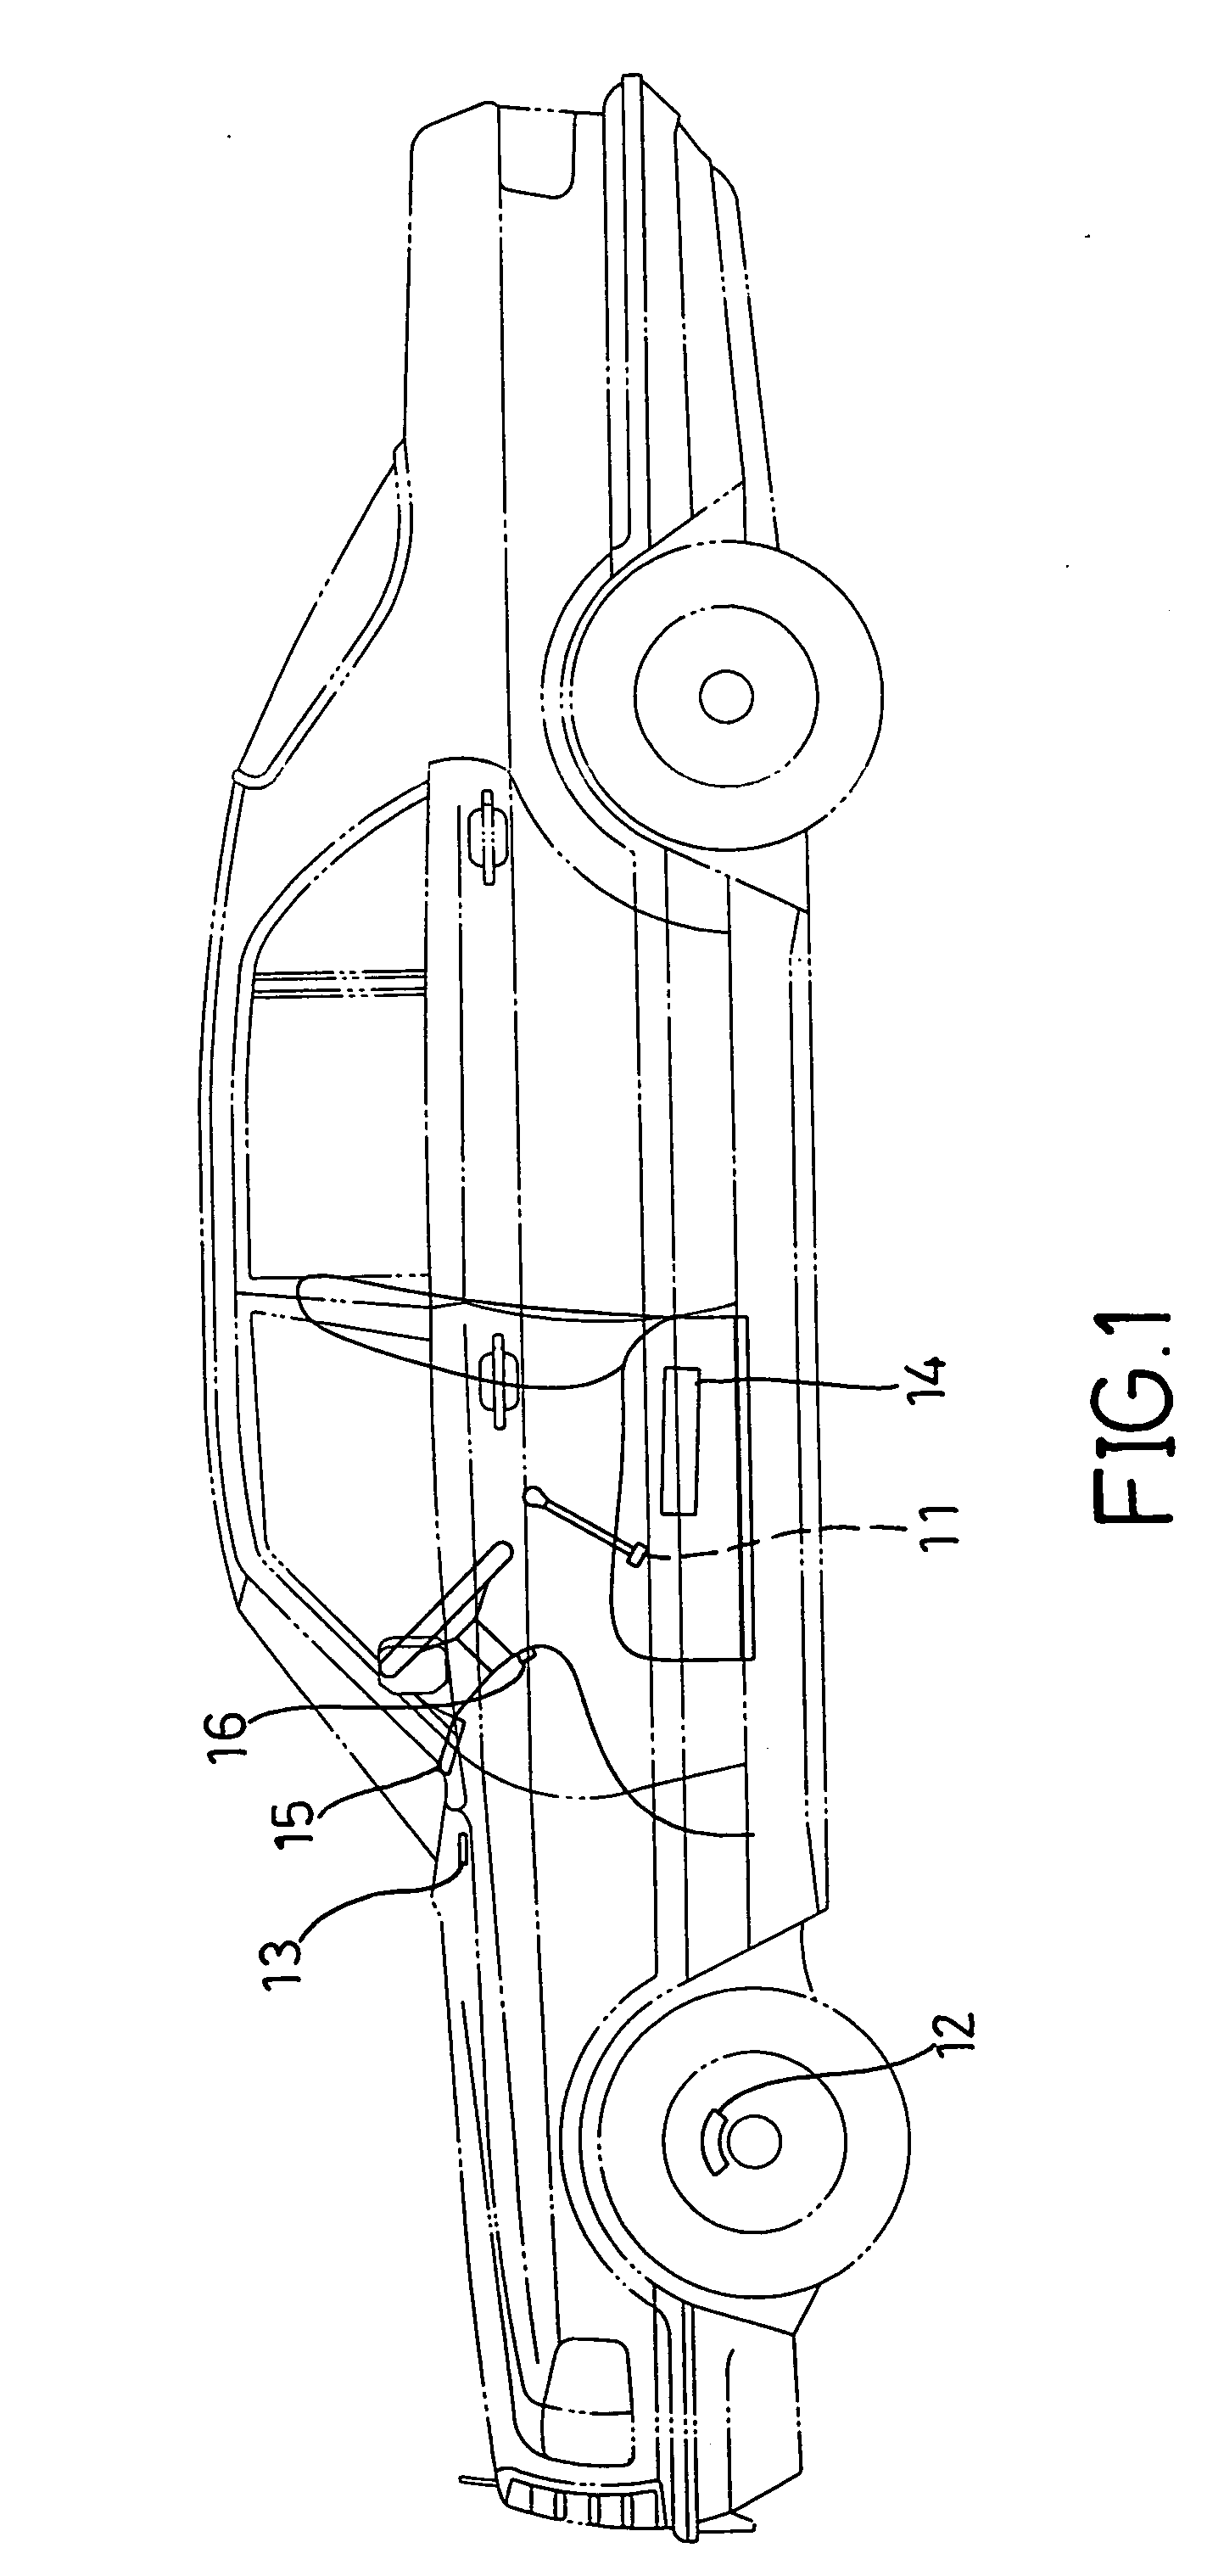 Manual brake auxiliary system for stick shift gear change type vehicle